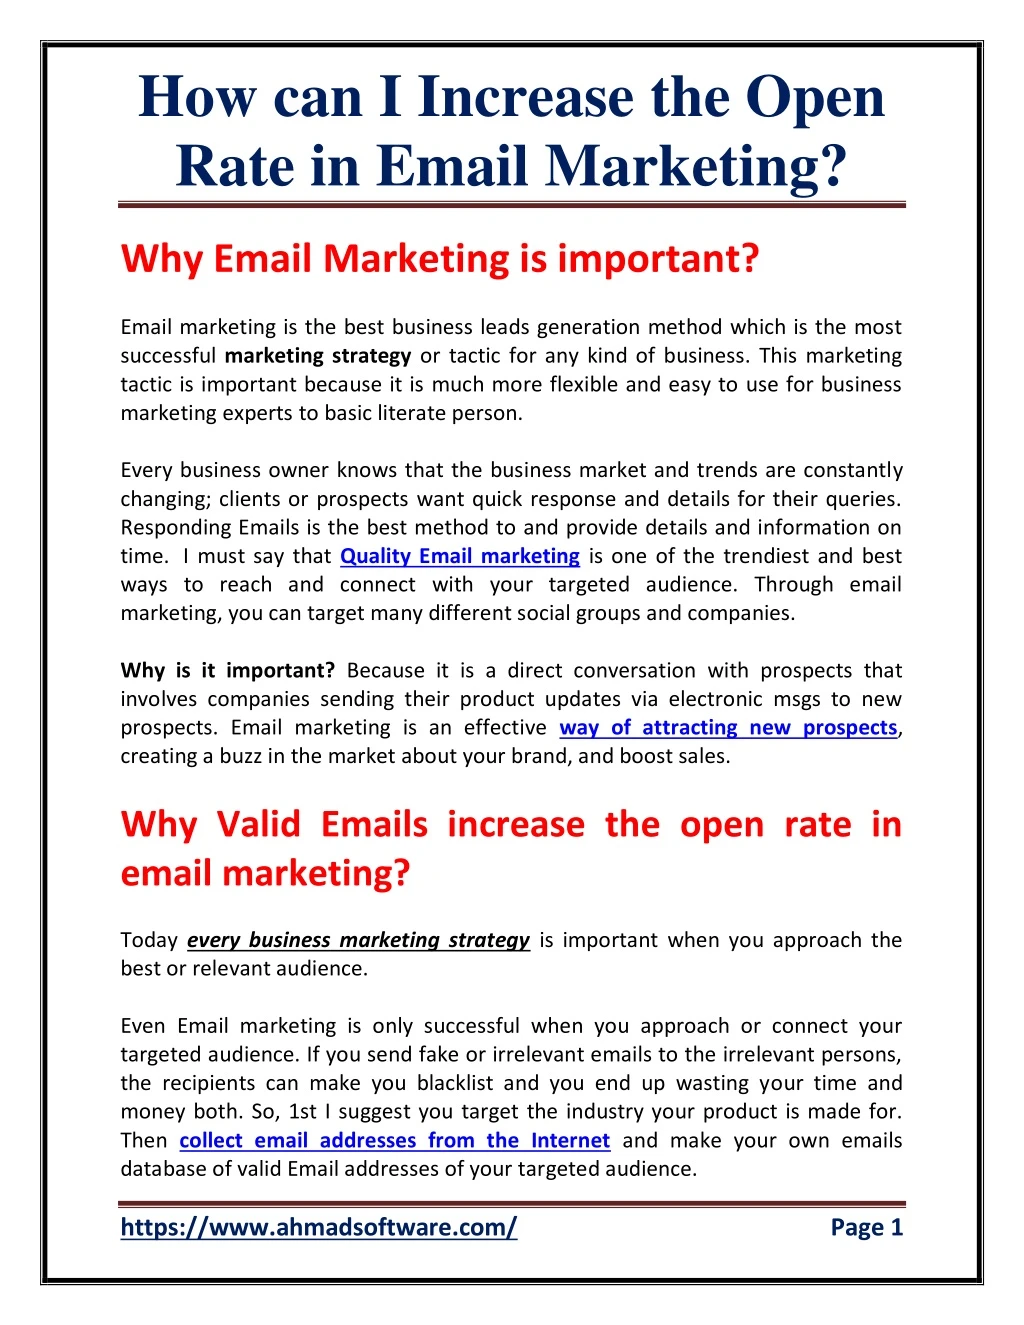 how can i increase the open rate in email